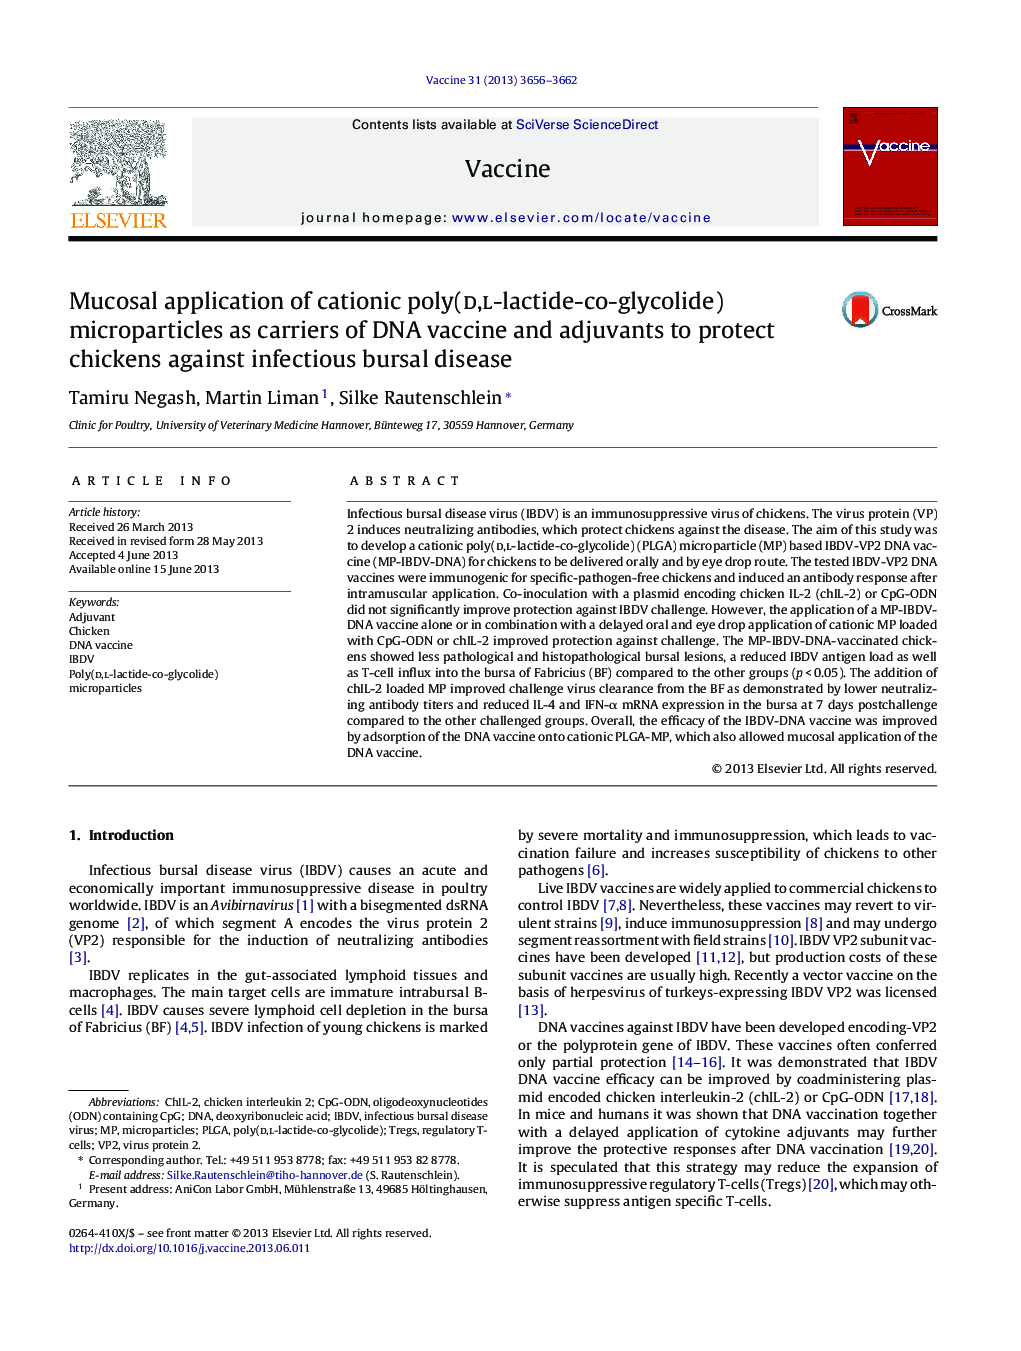 Mucosal application of cationic poly(d,l-lactide-co-glycolide) microparticles as carriers of DNA vaccine and adjuvants to protect chickens against infectious bursal disease